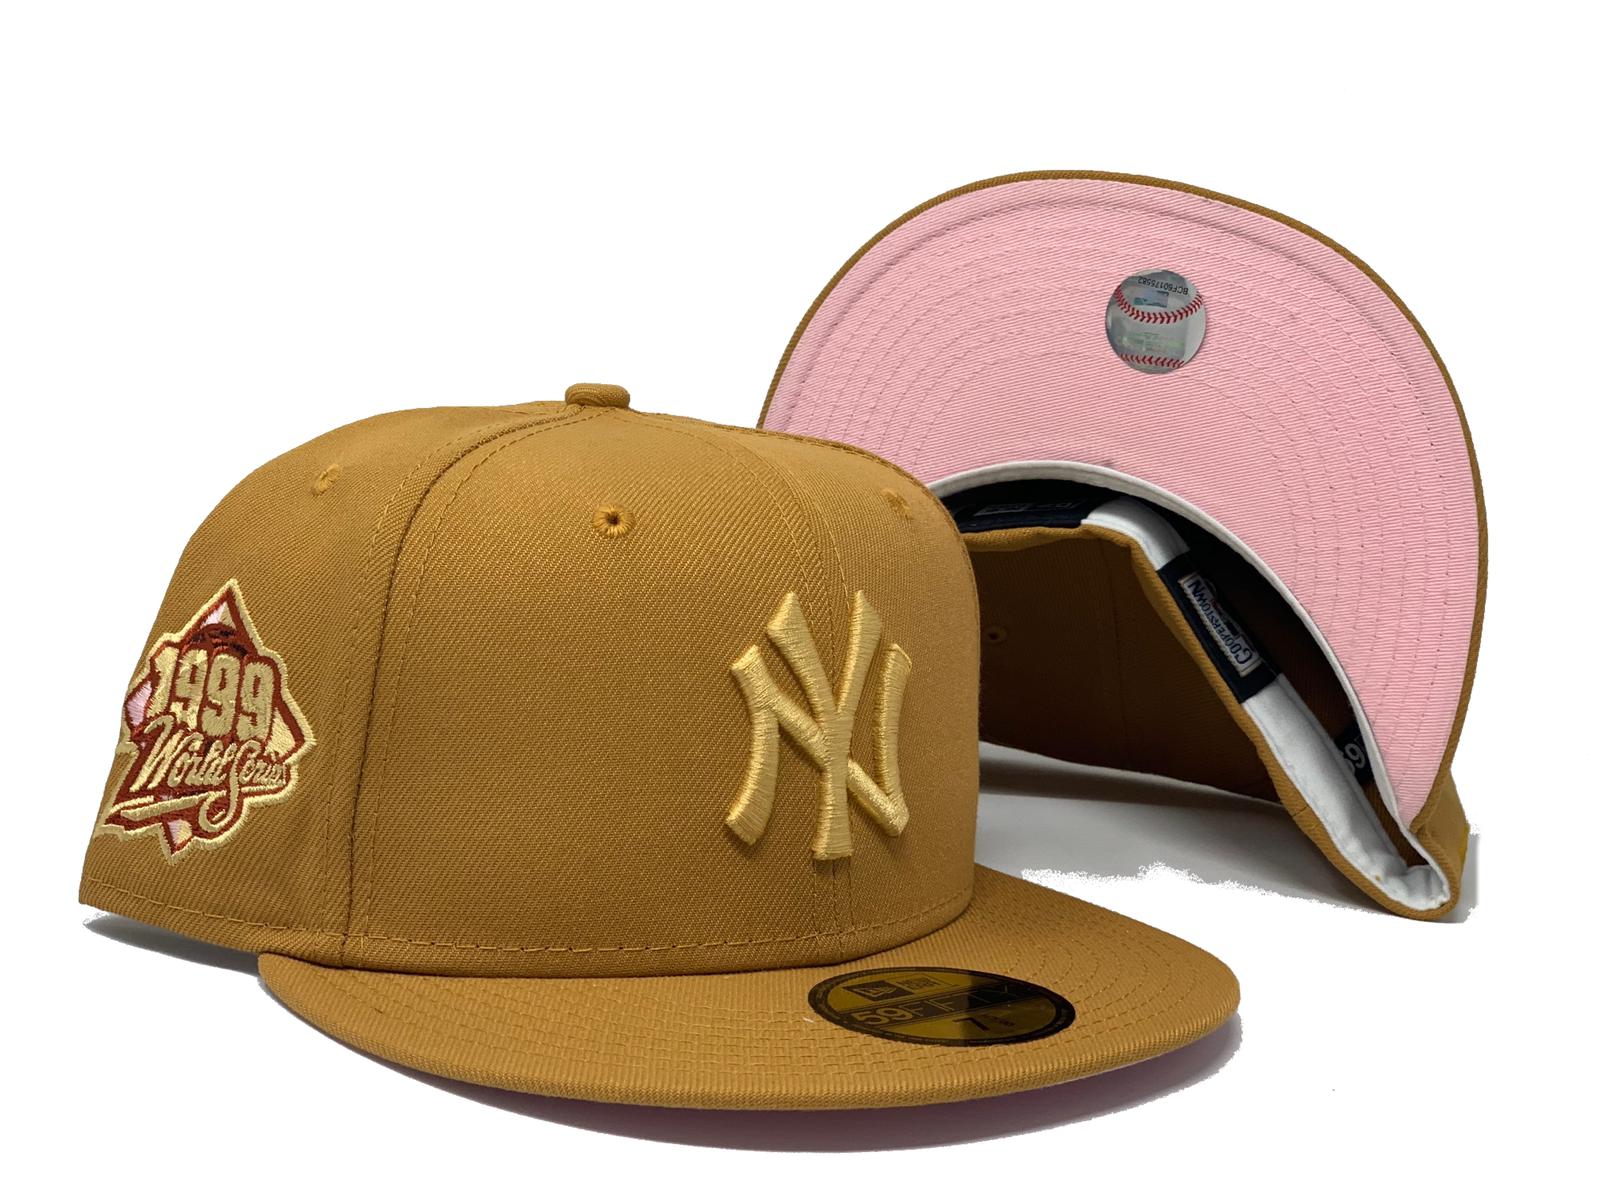 New York Yankees New Era Wheat 59FIFTY Fitted Hat - Tan